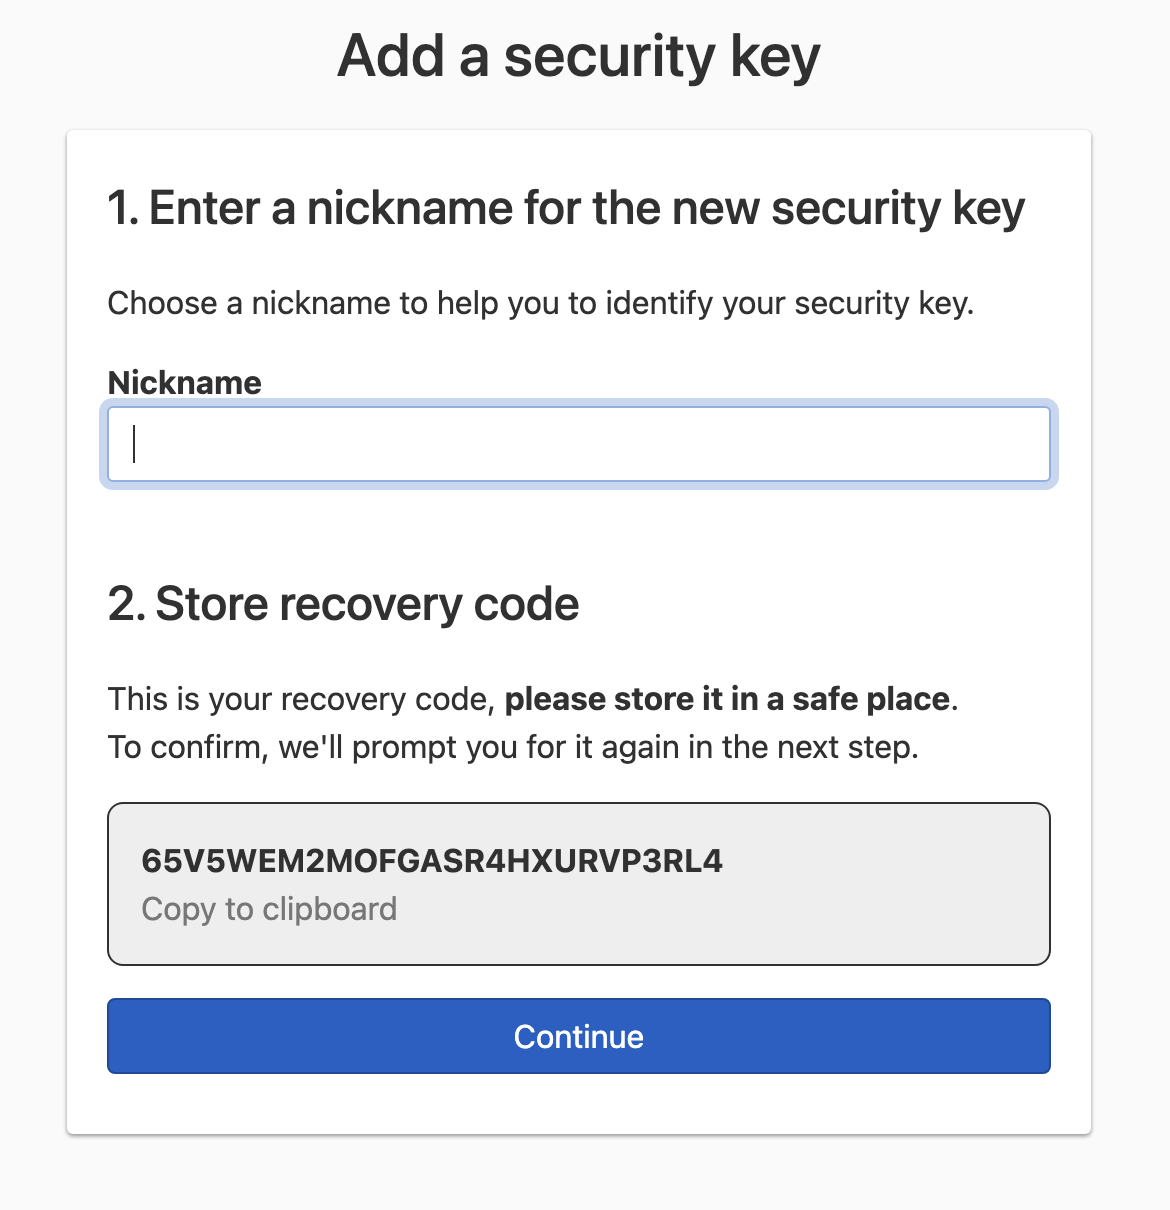 Security key nickname with recovery code